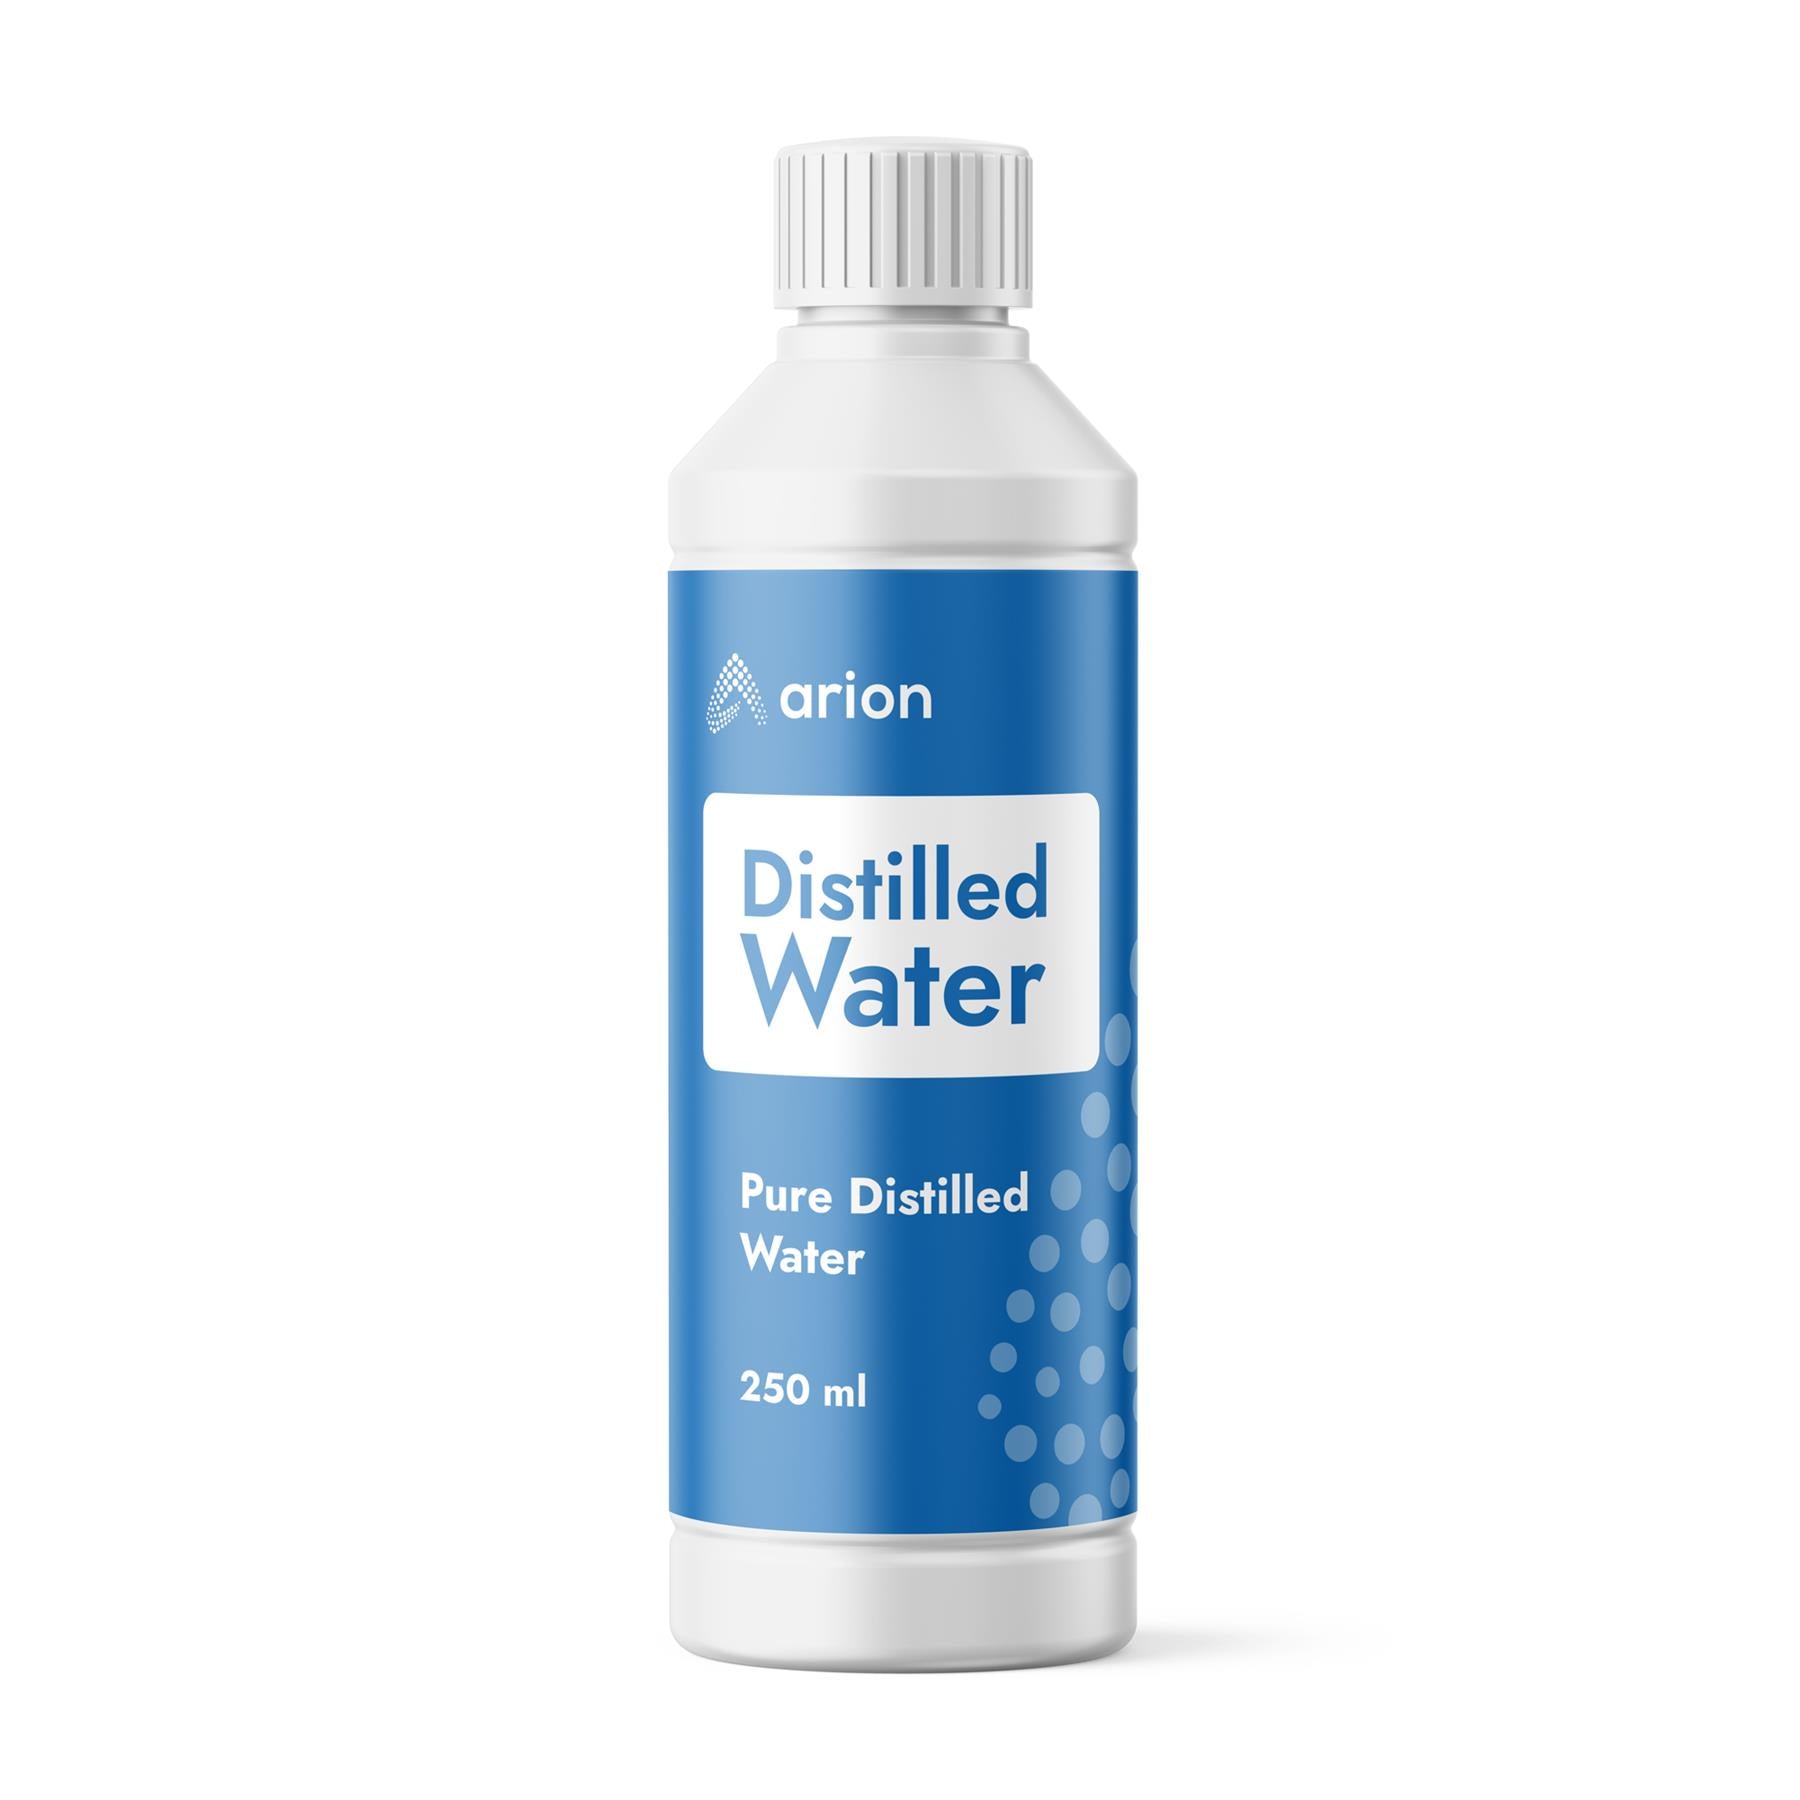 Winstons Distilled Water - Just Horse Riders